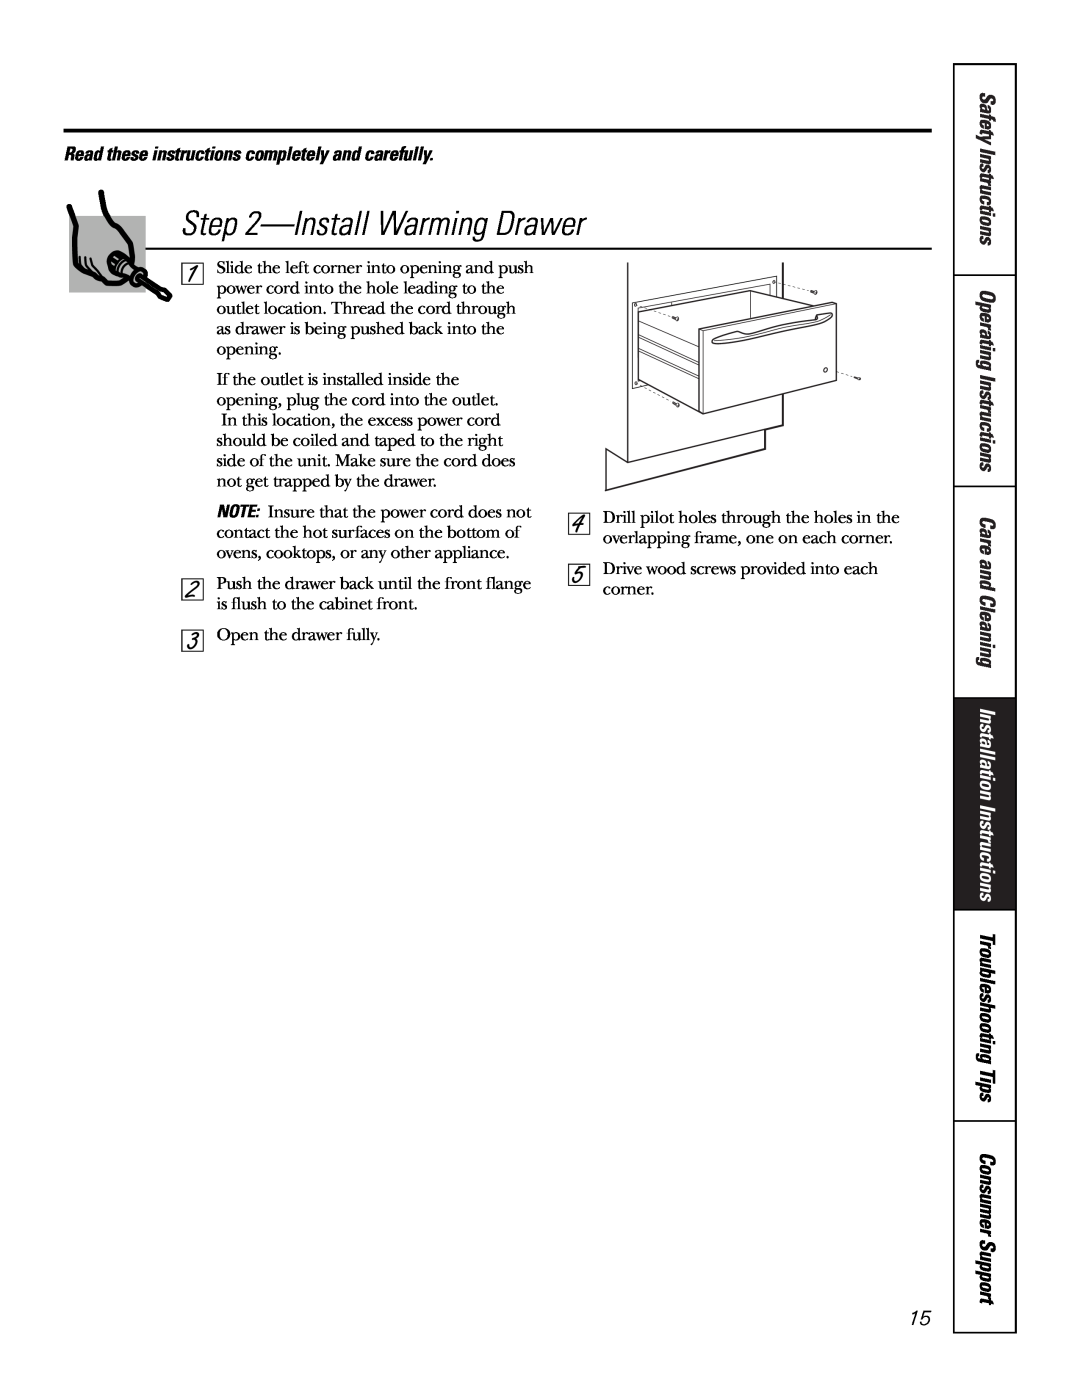 GE JKD915 owner manual InstallWarming Drawer, Read these instructions completely and carefully, Safety Instructions 